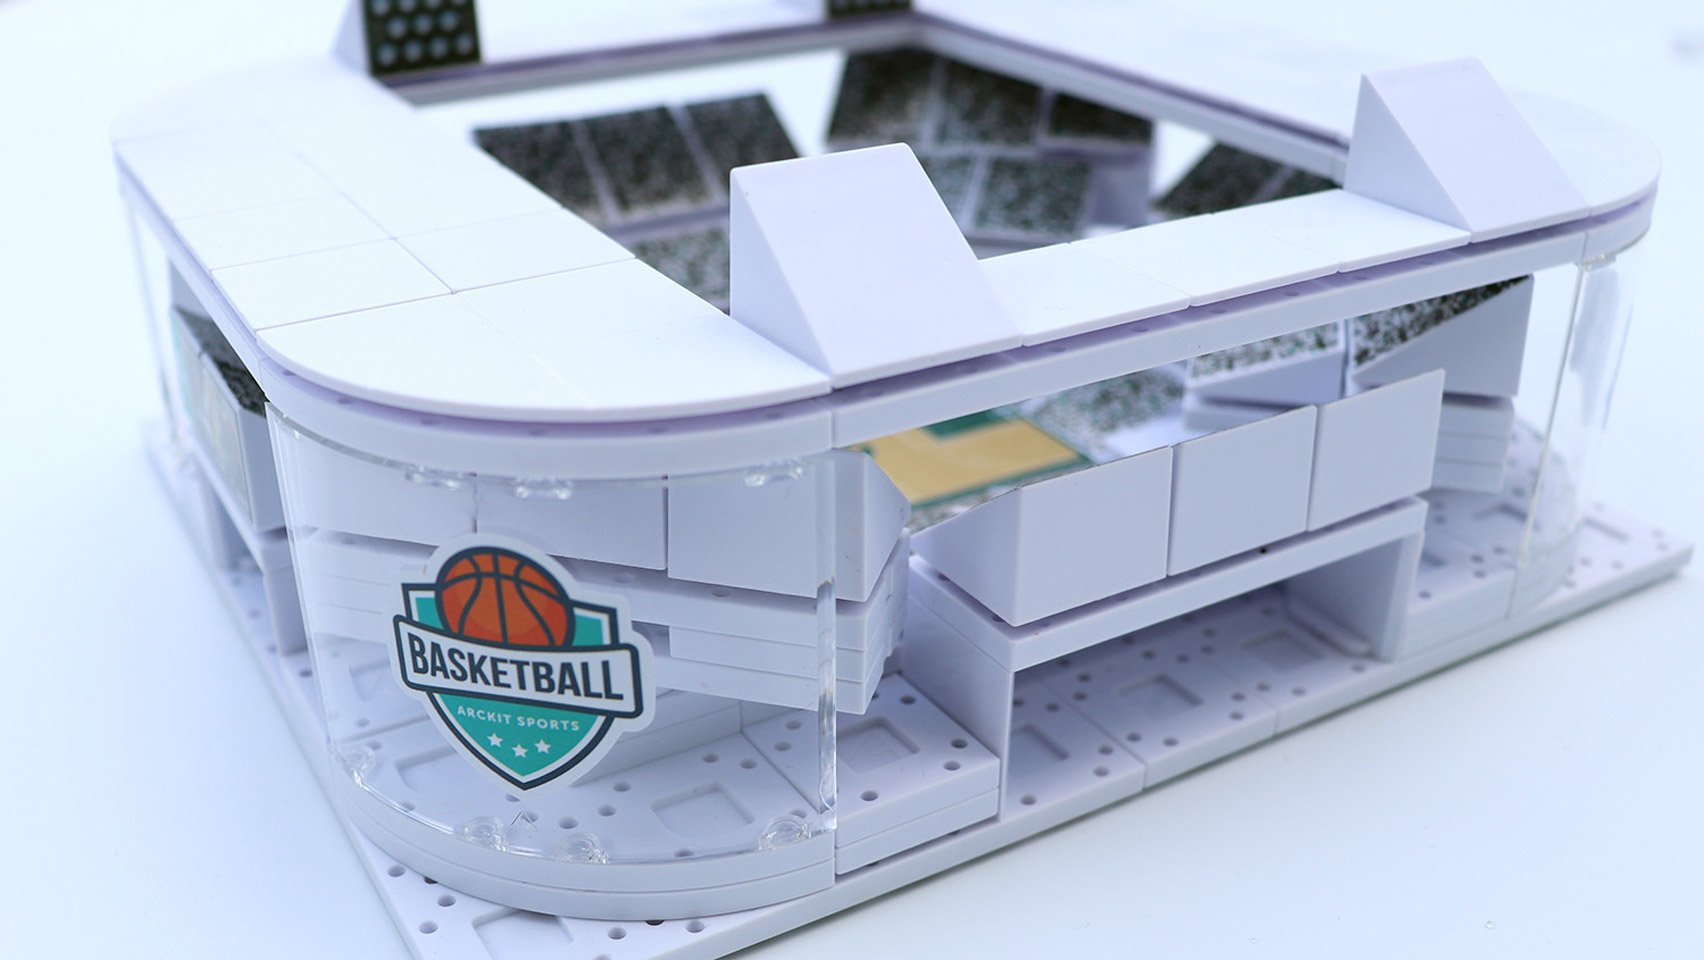 Architectural model-building kit of sports stadiums by Arckit